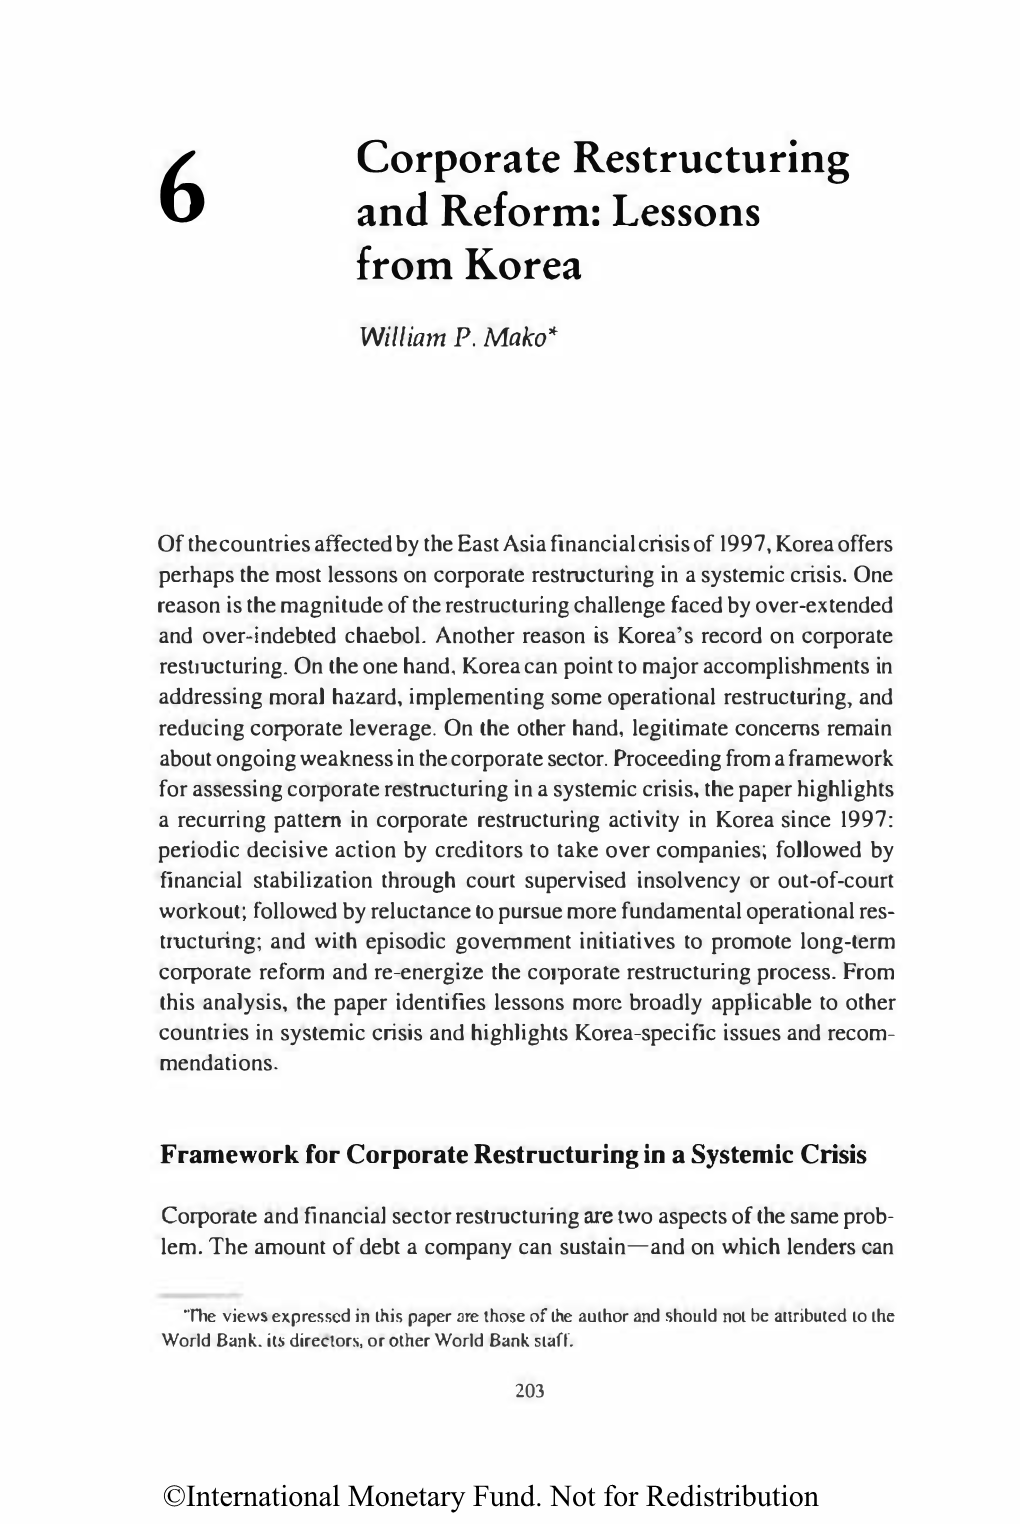 Corporate Restructuring and Reform: Lessons from Korea 205